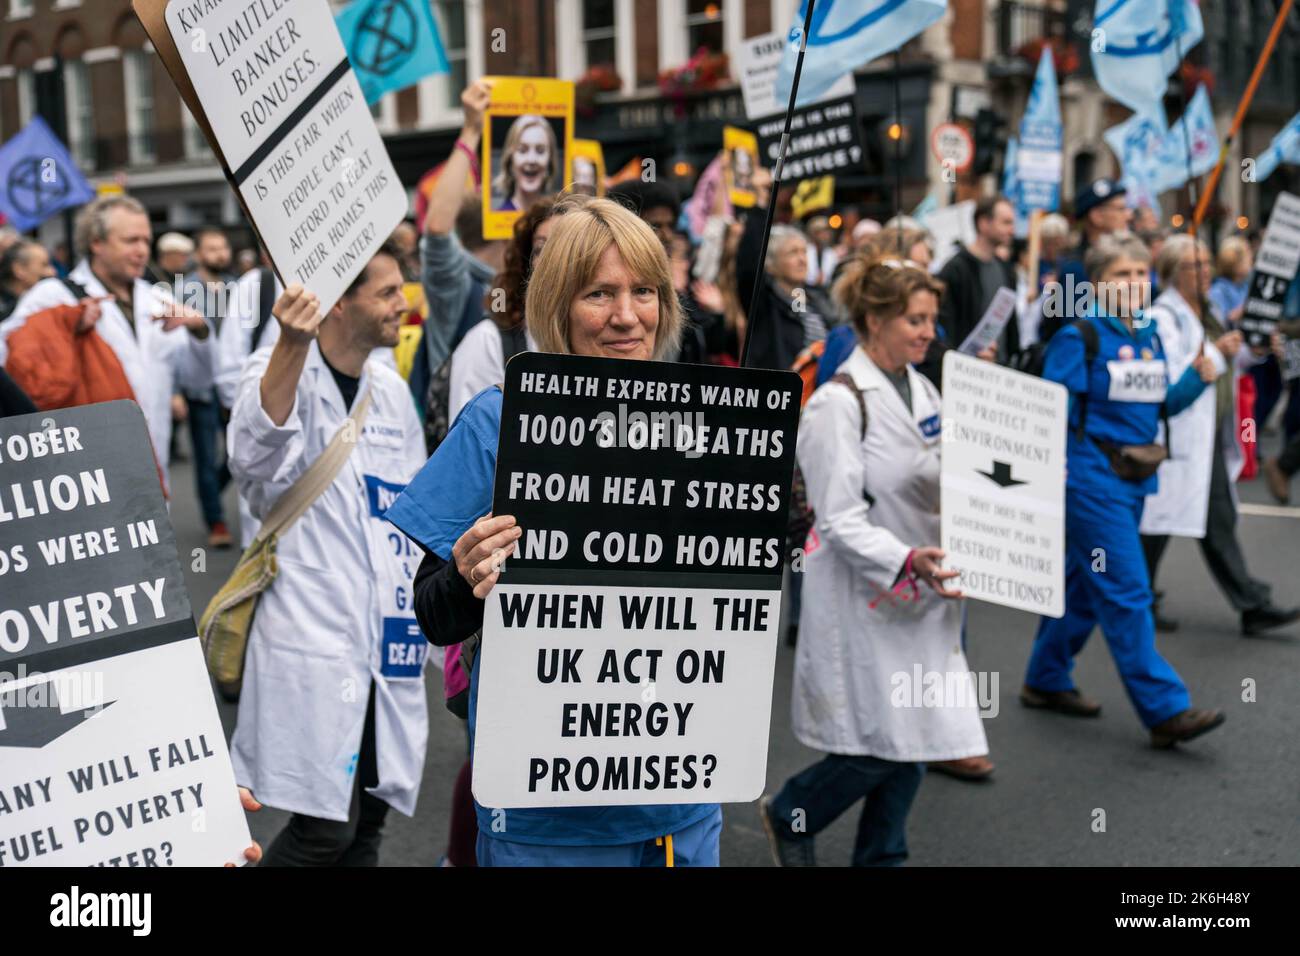 London, UK. 14 Oct, 2022. Extinction Rebellion protesters march from Trafalgar Square to Downing Street via Whitehall demanding the government does more to address climate change, in London, UK. Credit: Vladimir Morozov/Alamy Live News. Stock Photo